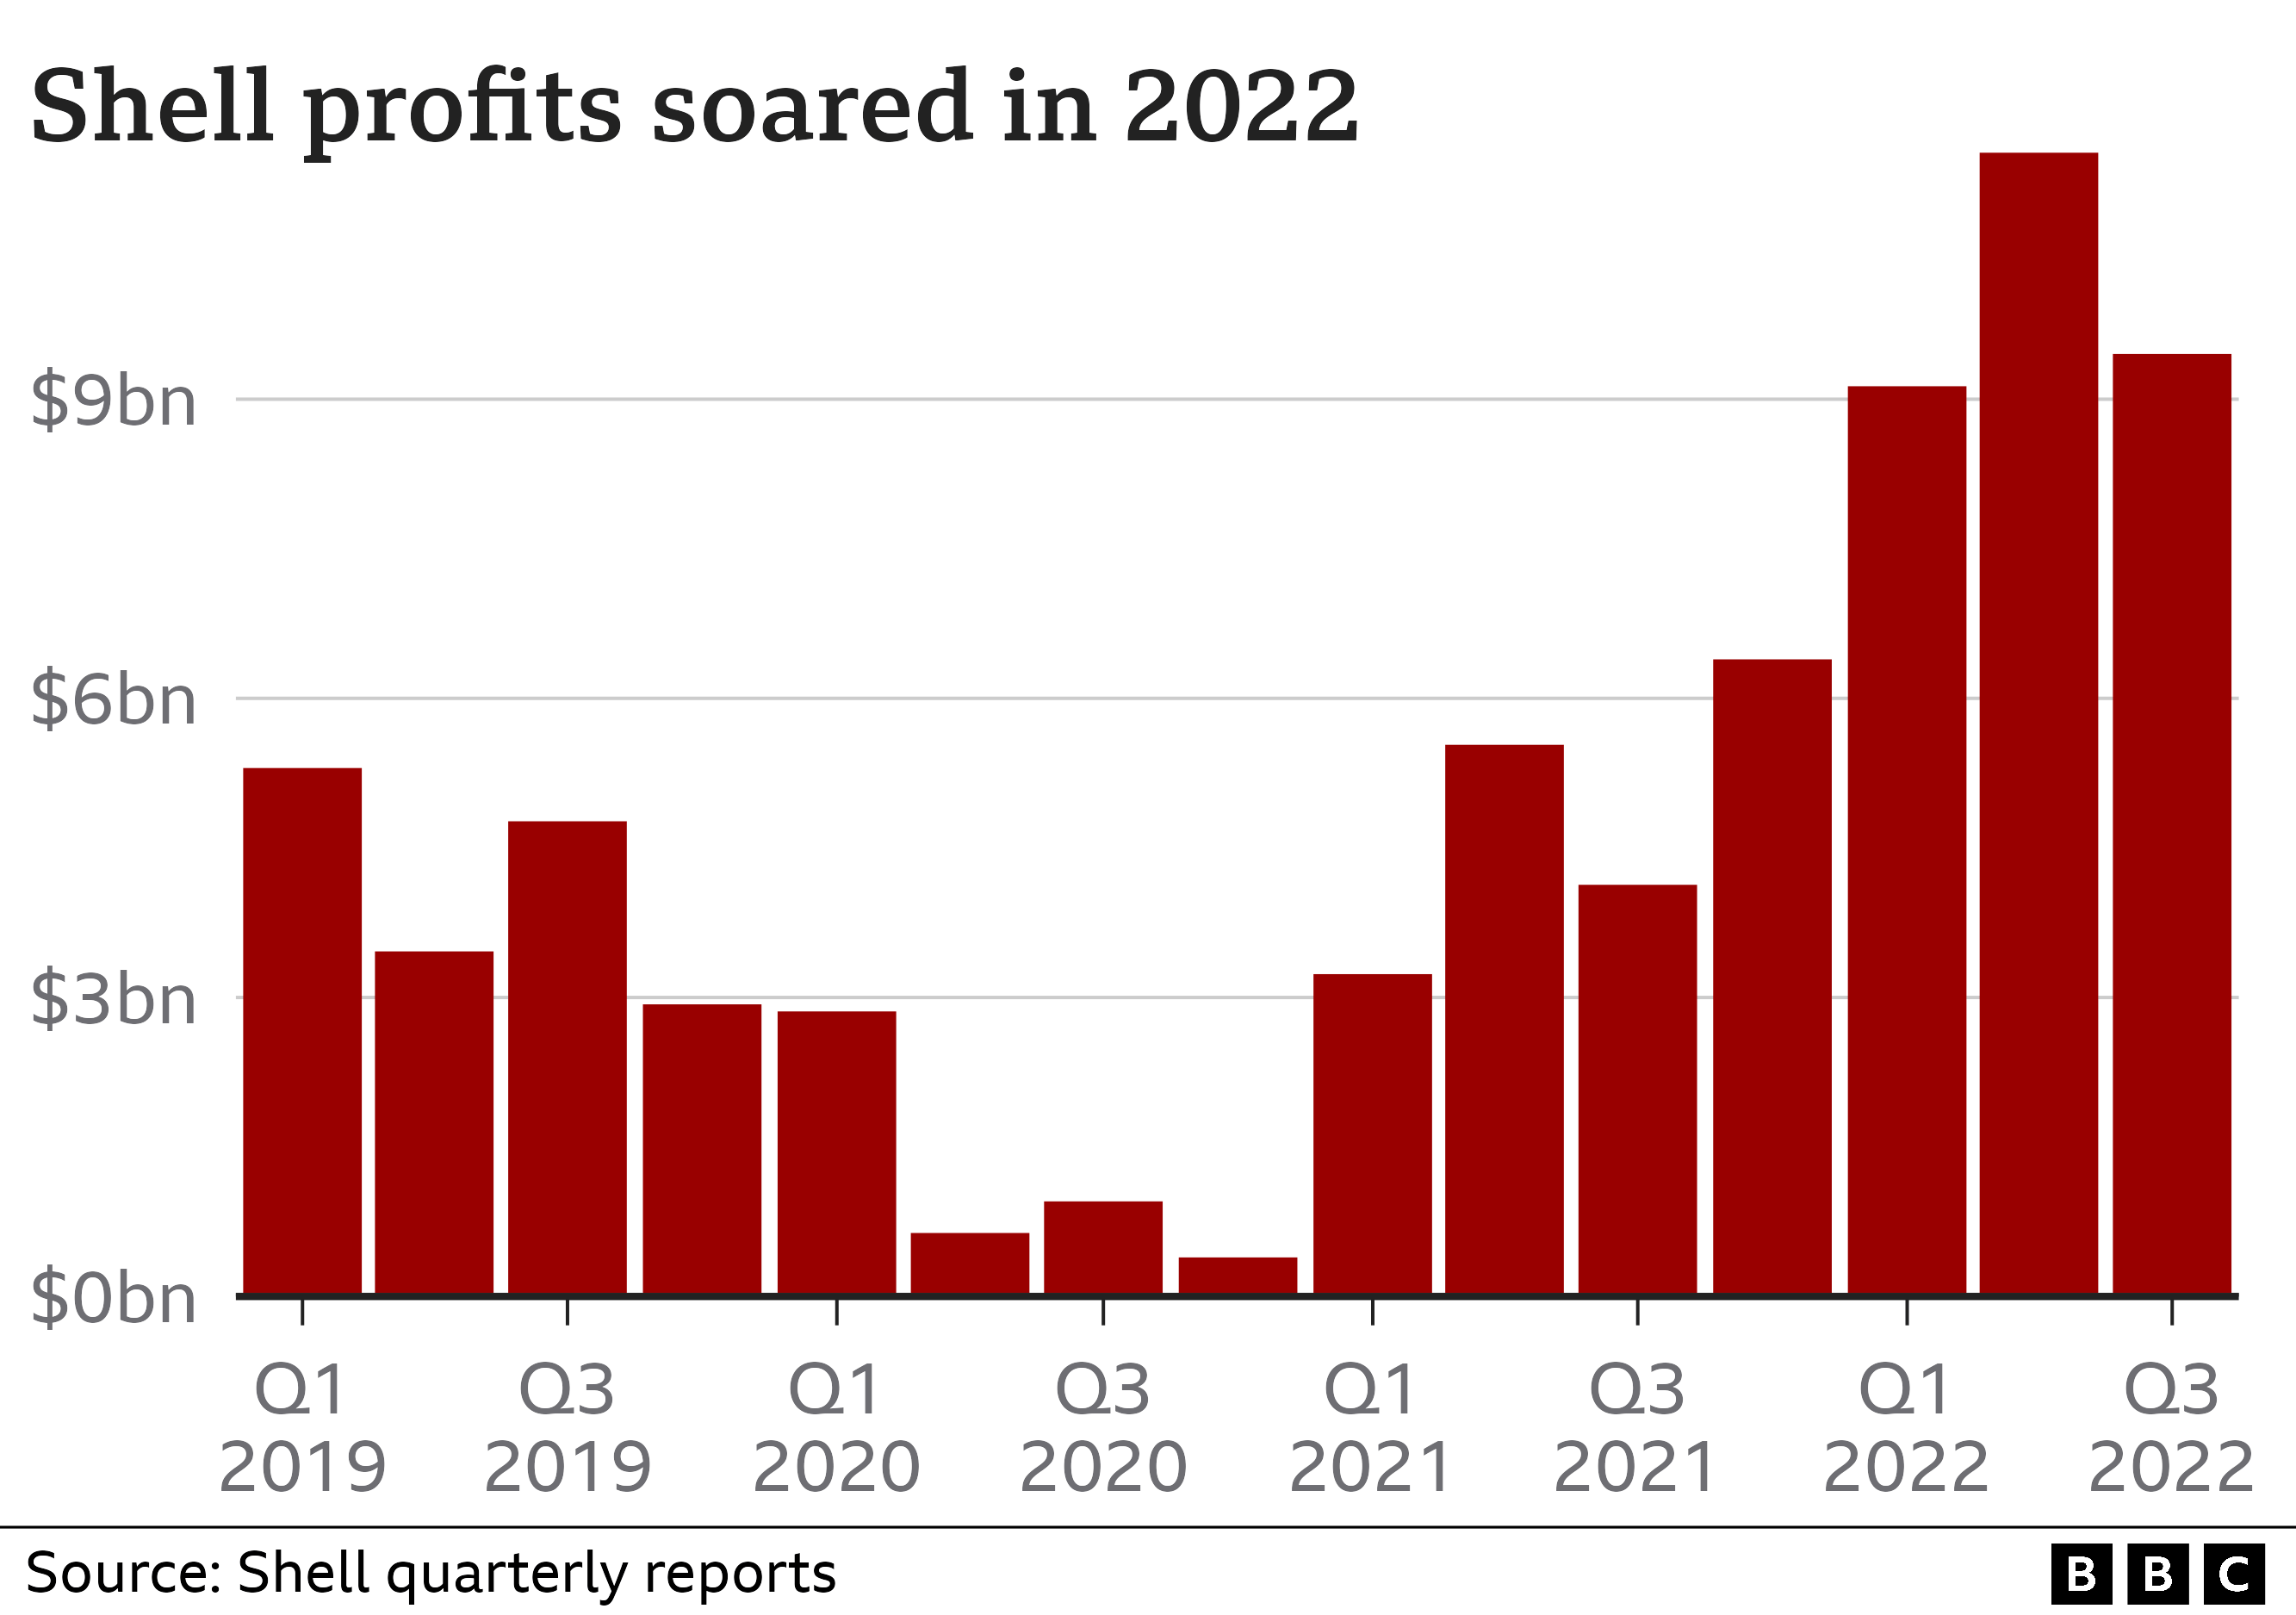 Graph showing Shell's profits